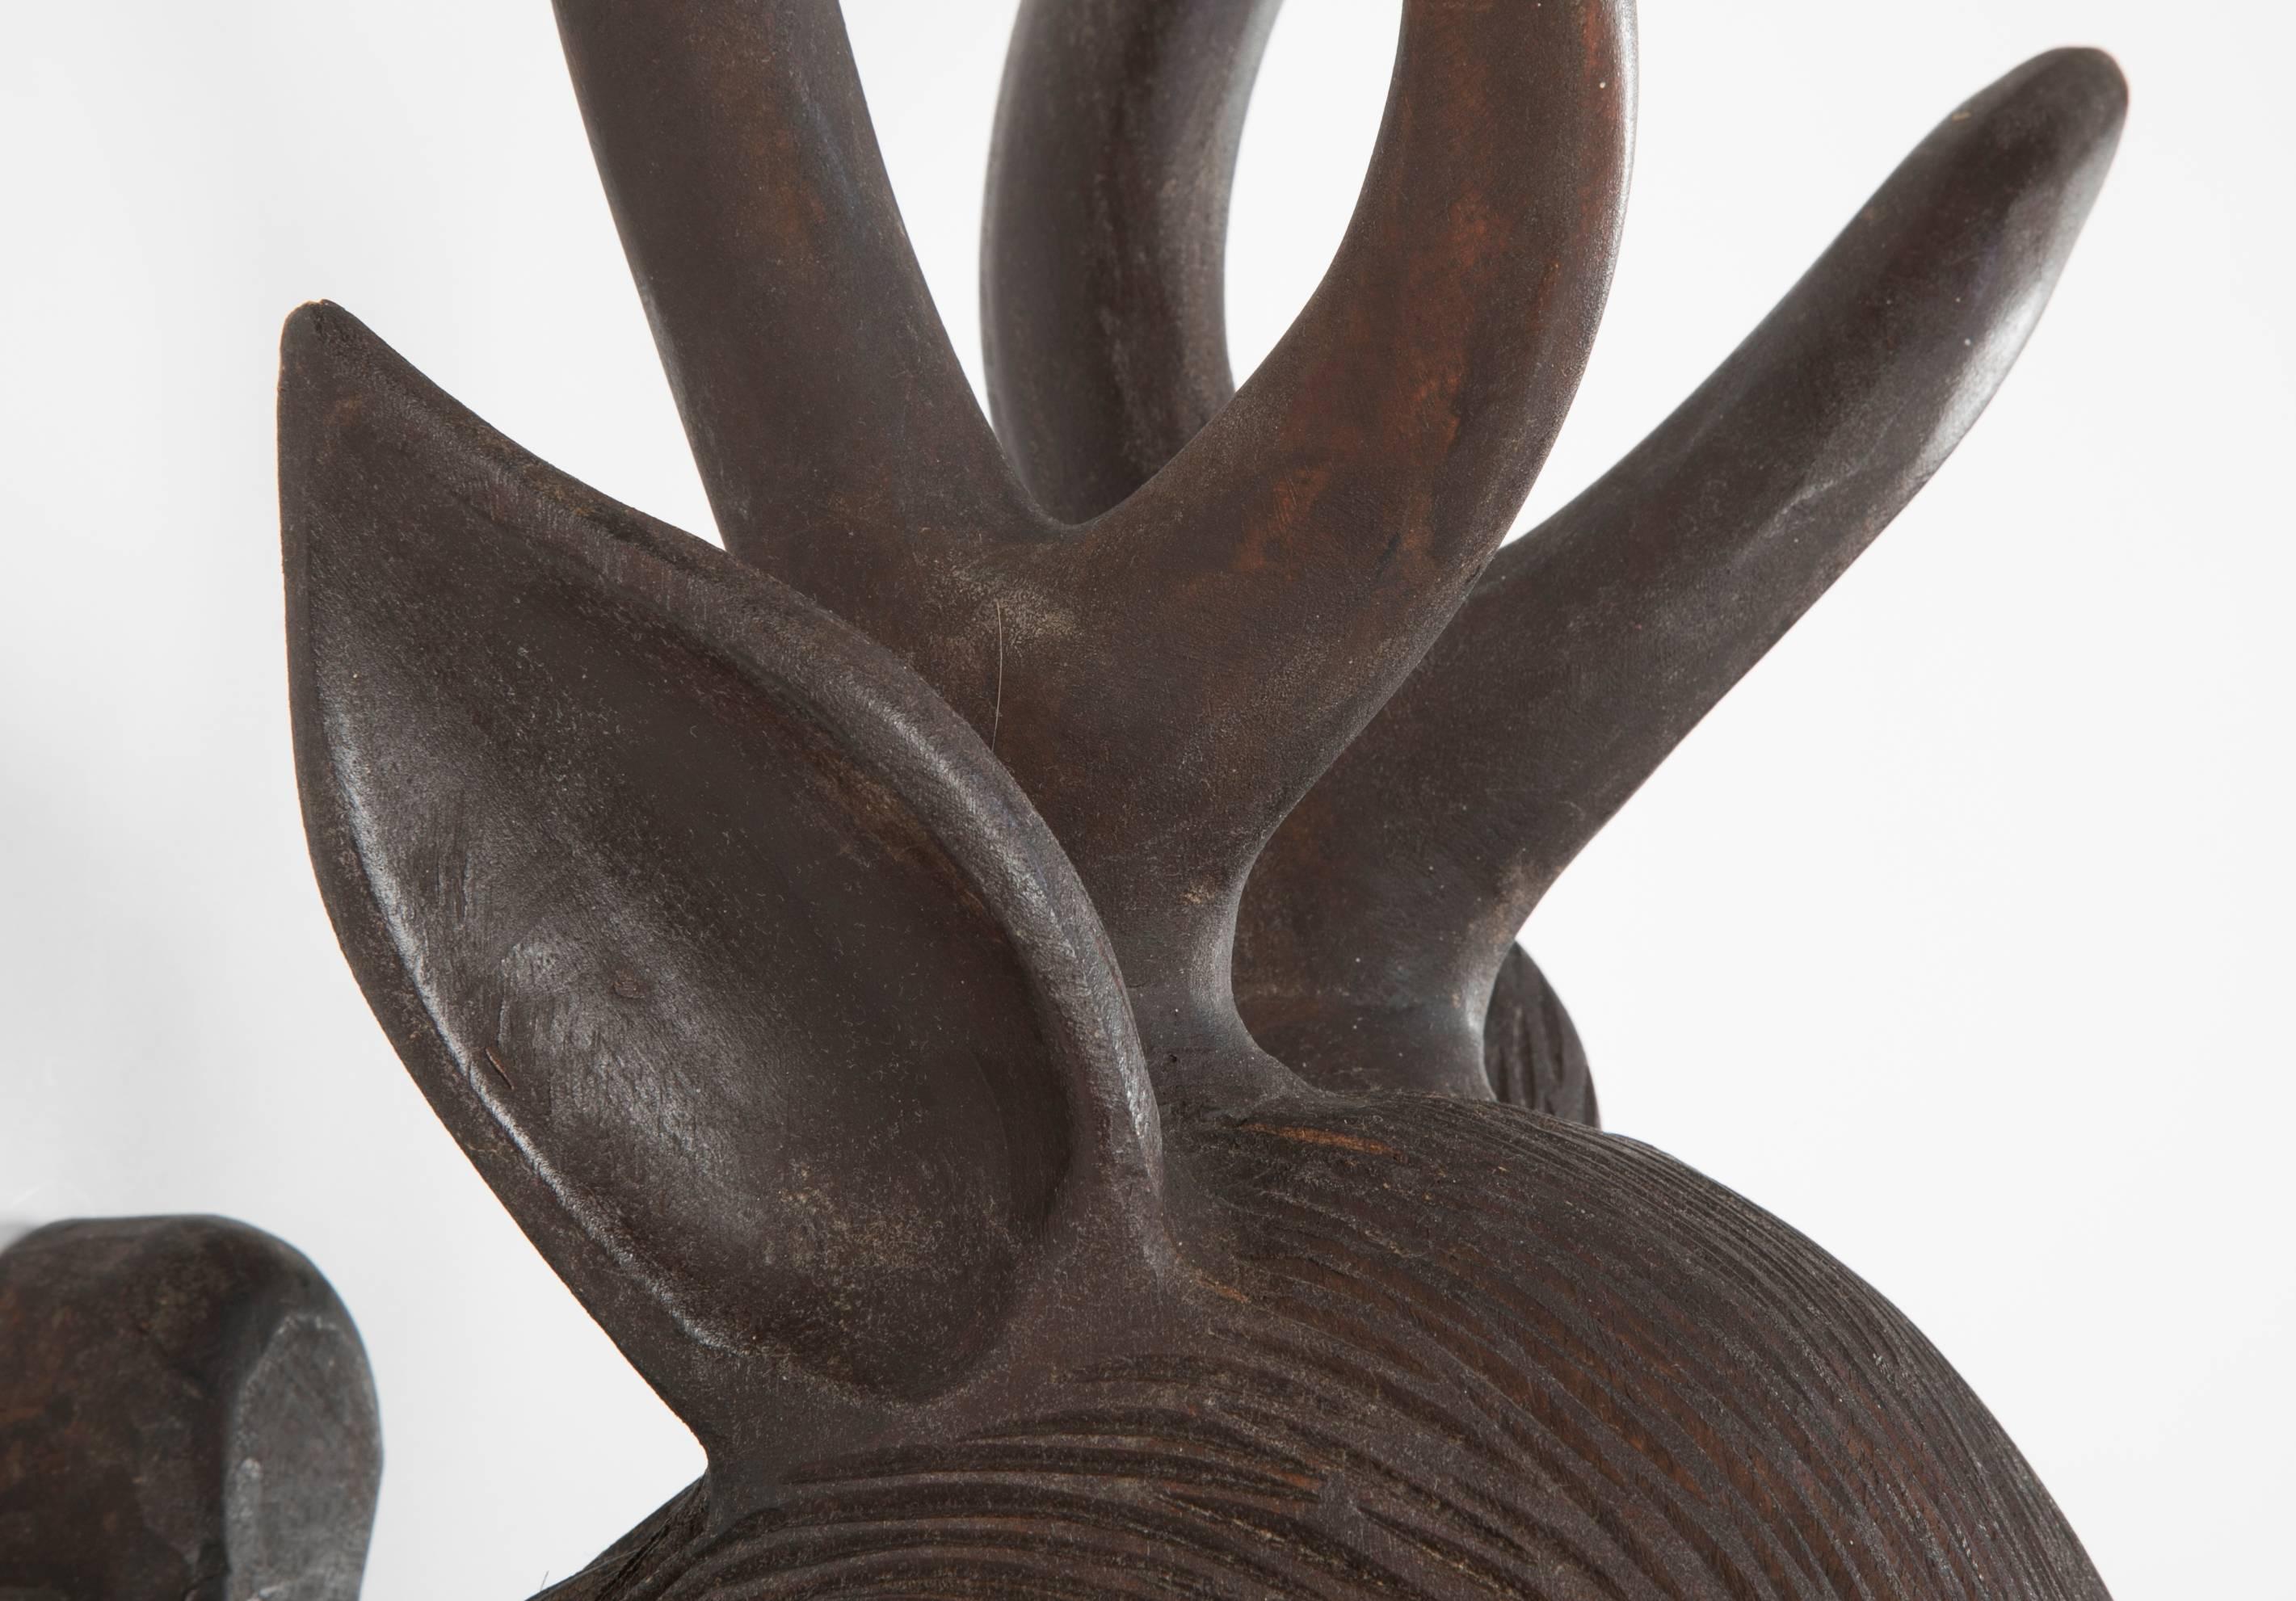 19th Century Black Forest Carved Wood Deer Head, Hand-Carved Antlers